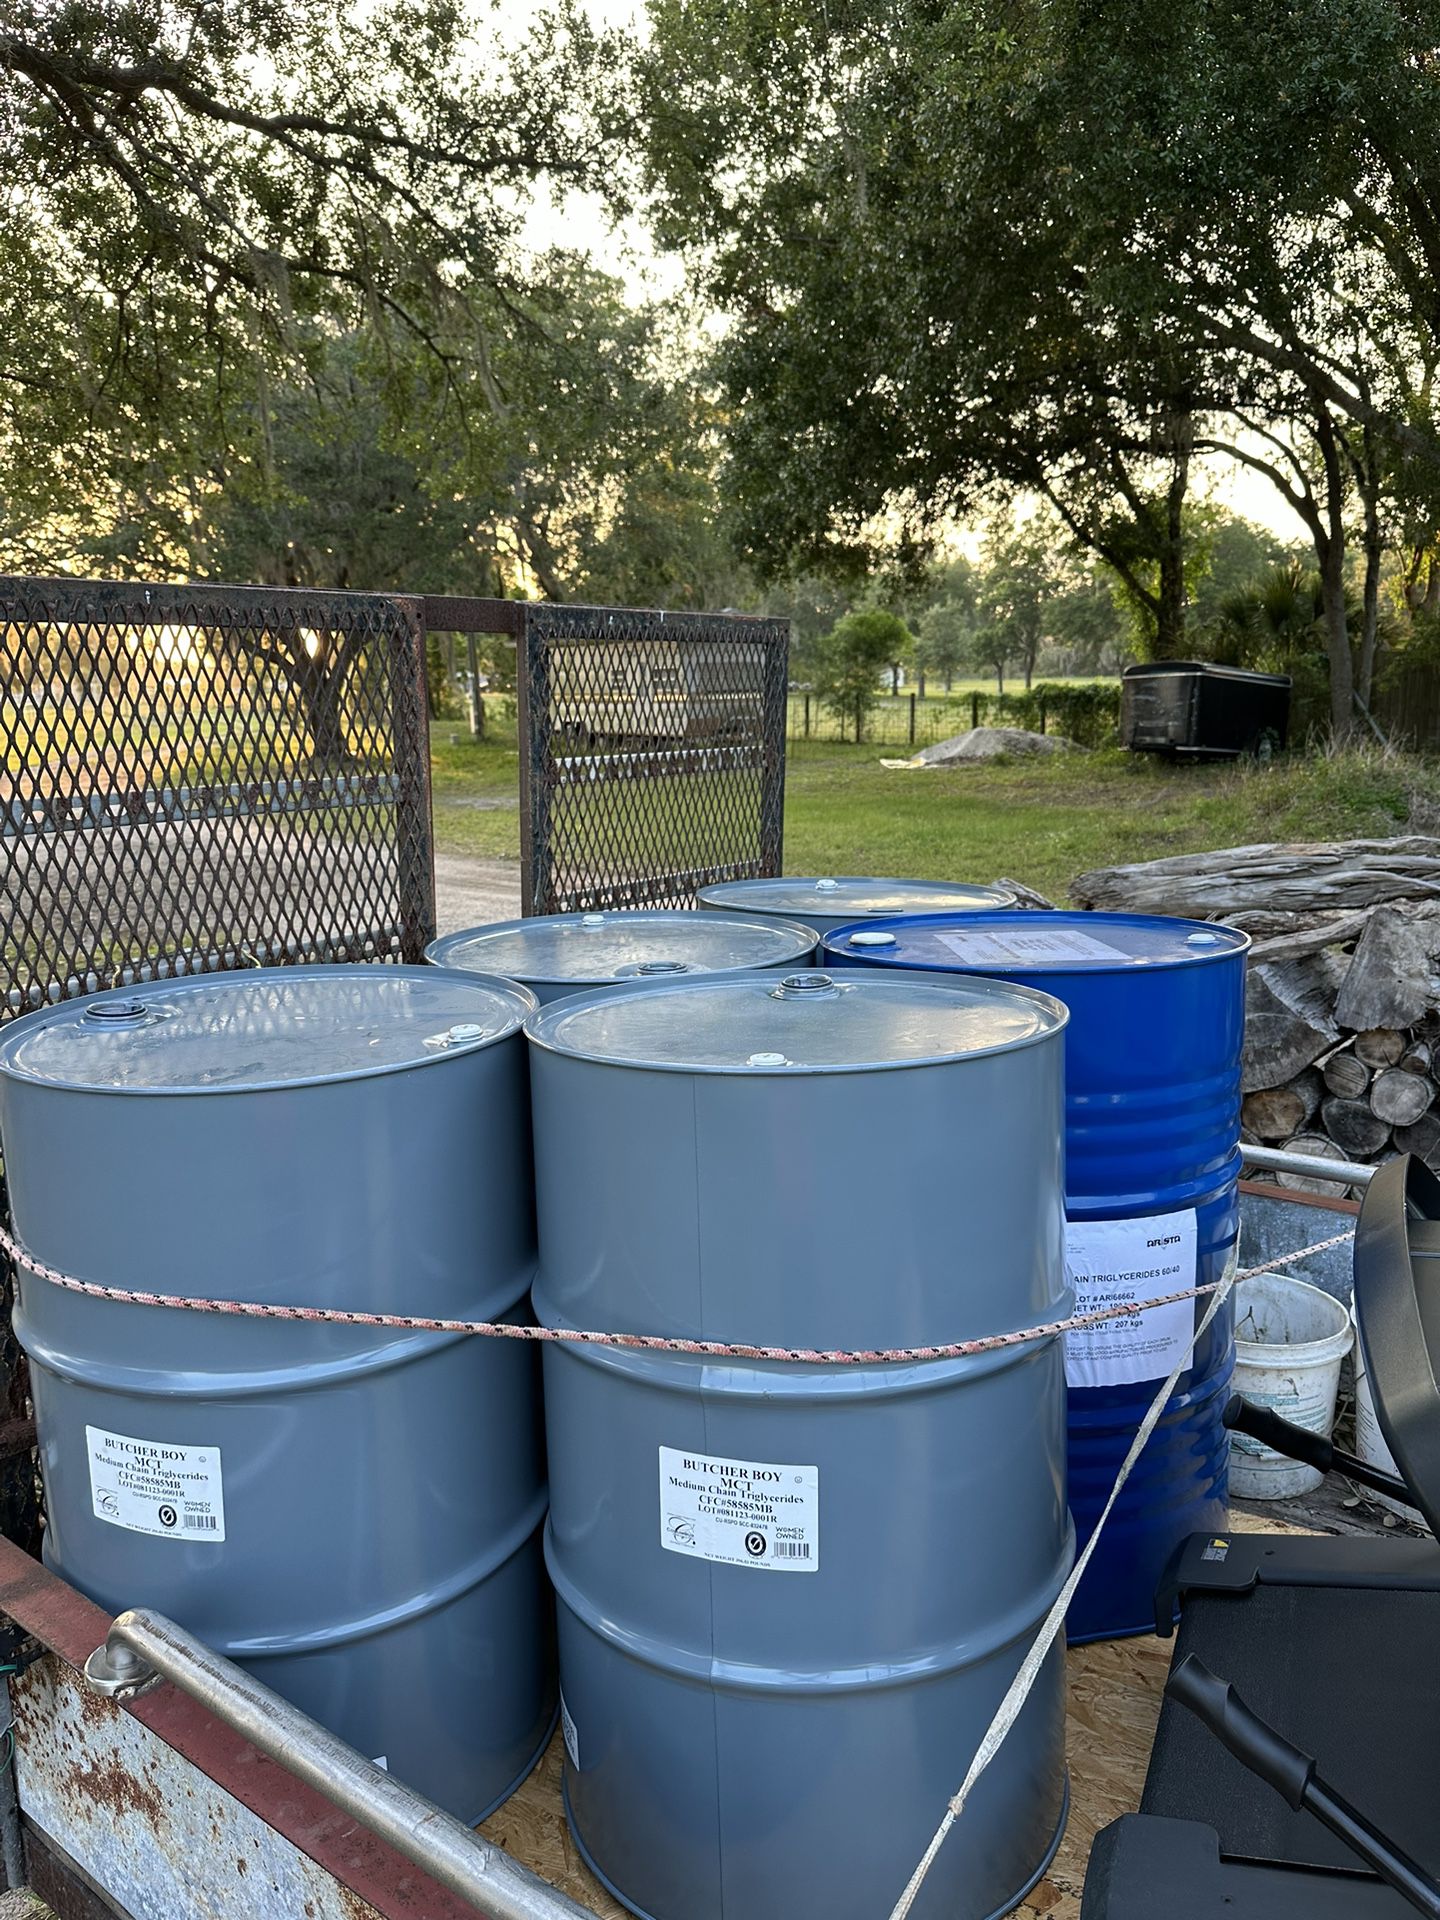 5 Barrels 55 Gallon Non removable tops $20 Each Or All 5 For $75